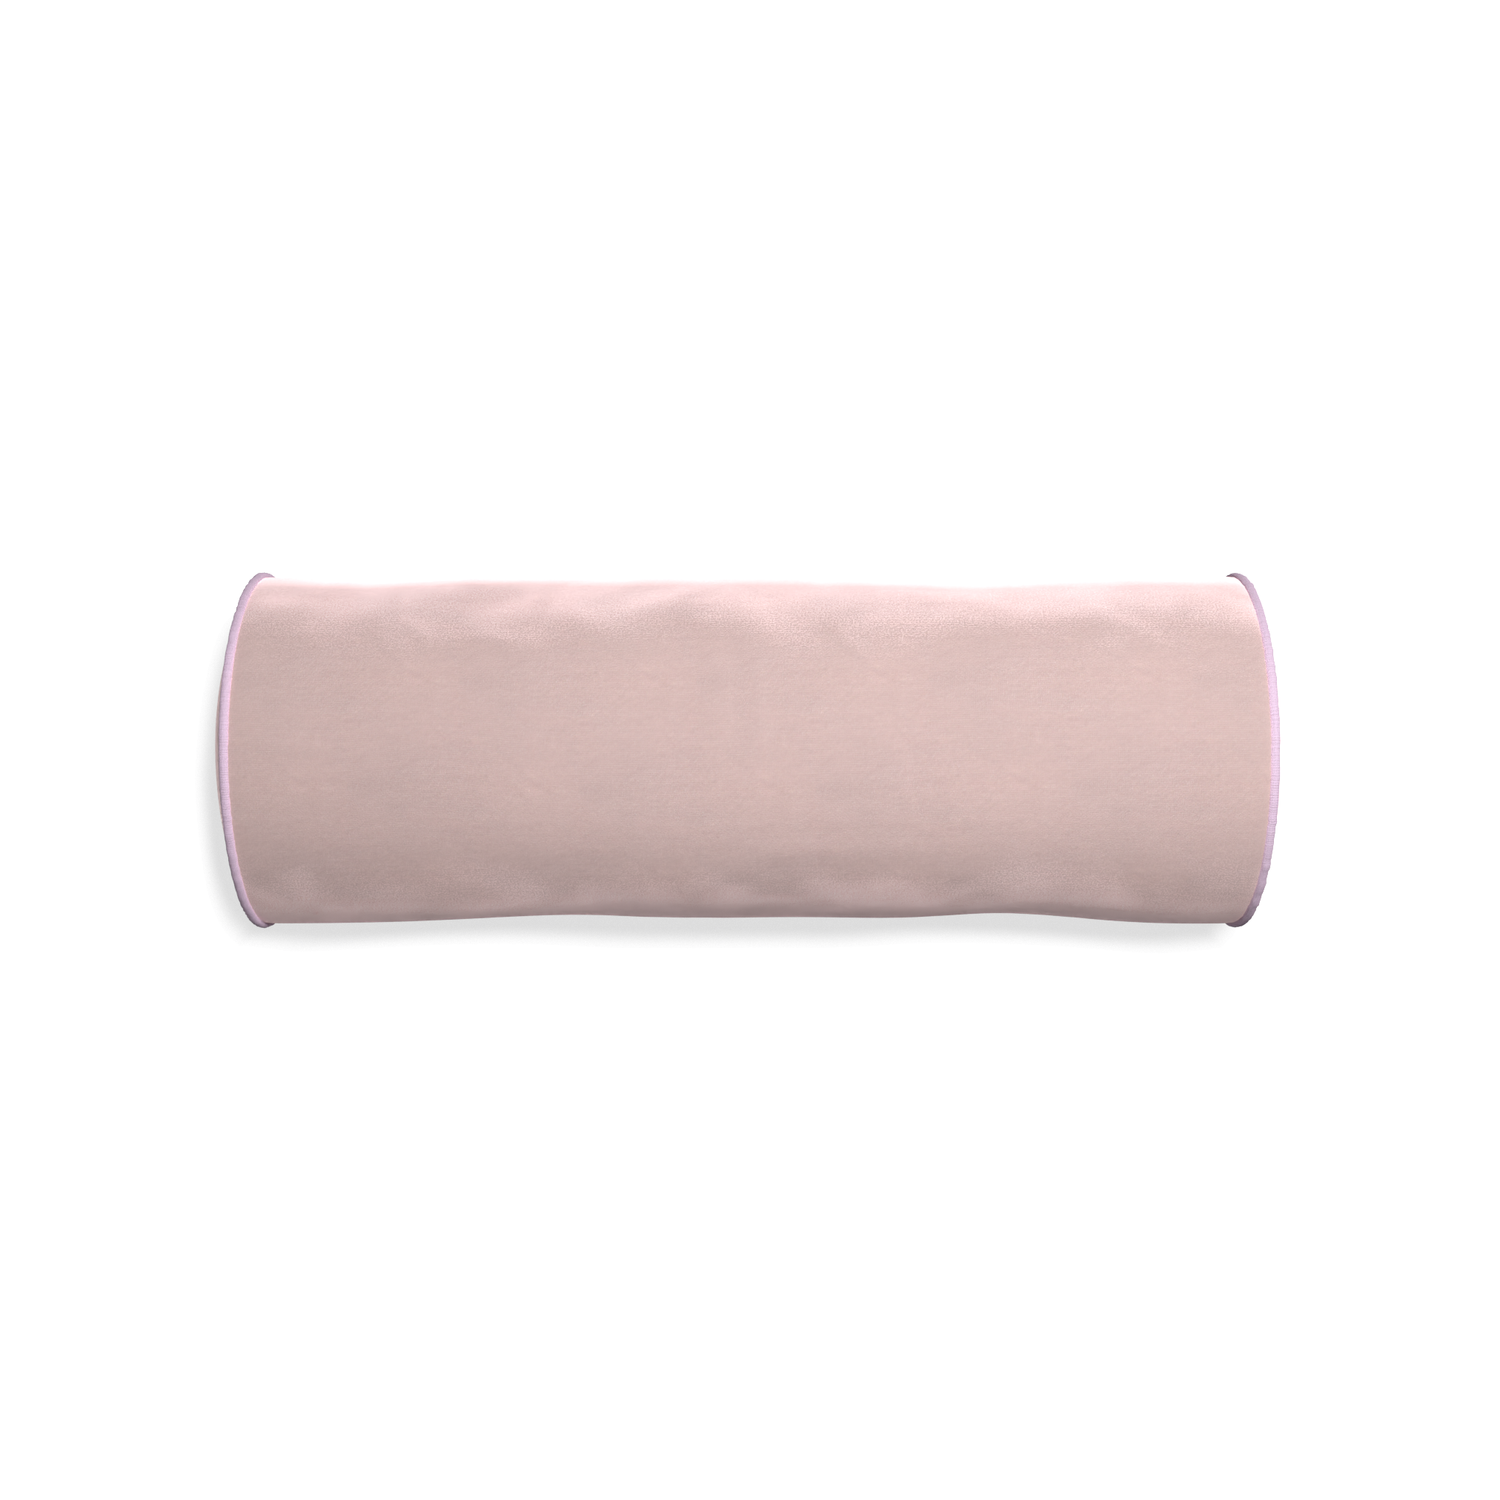 bolster light pink velvet pillow with lilac piping